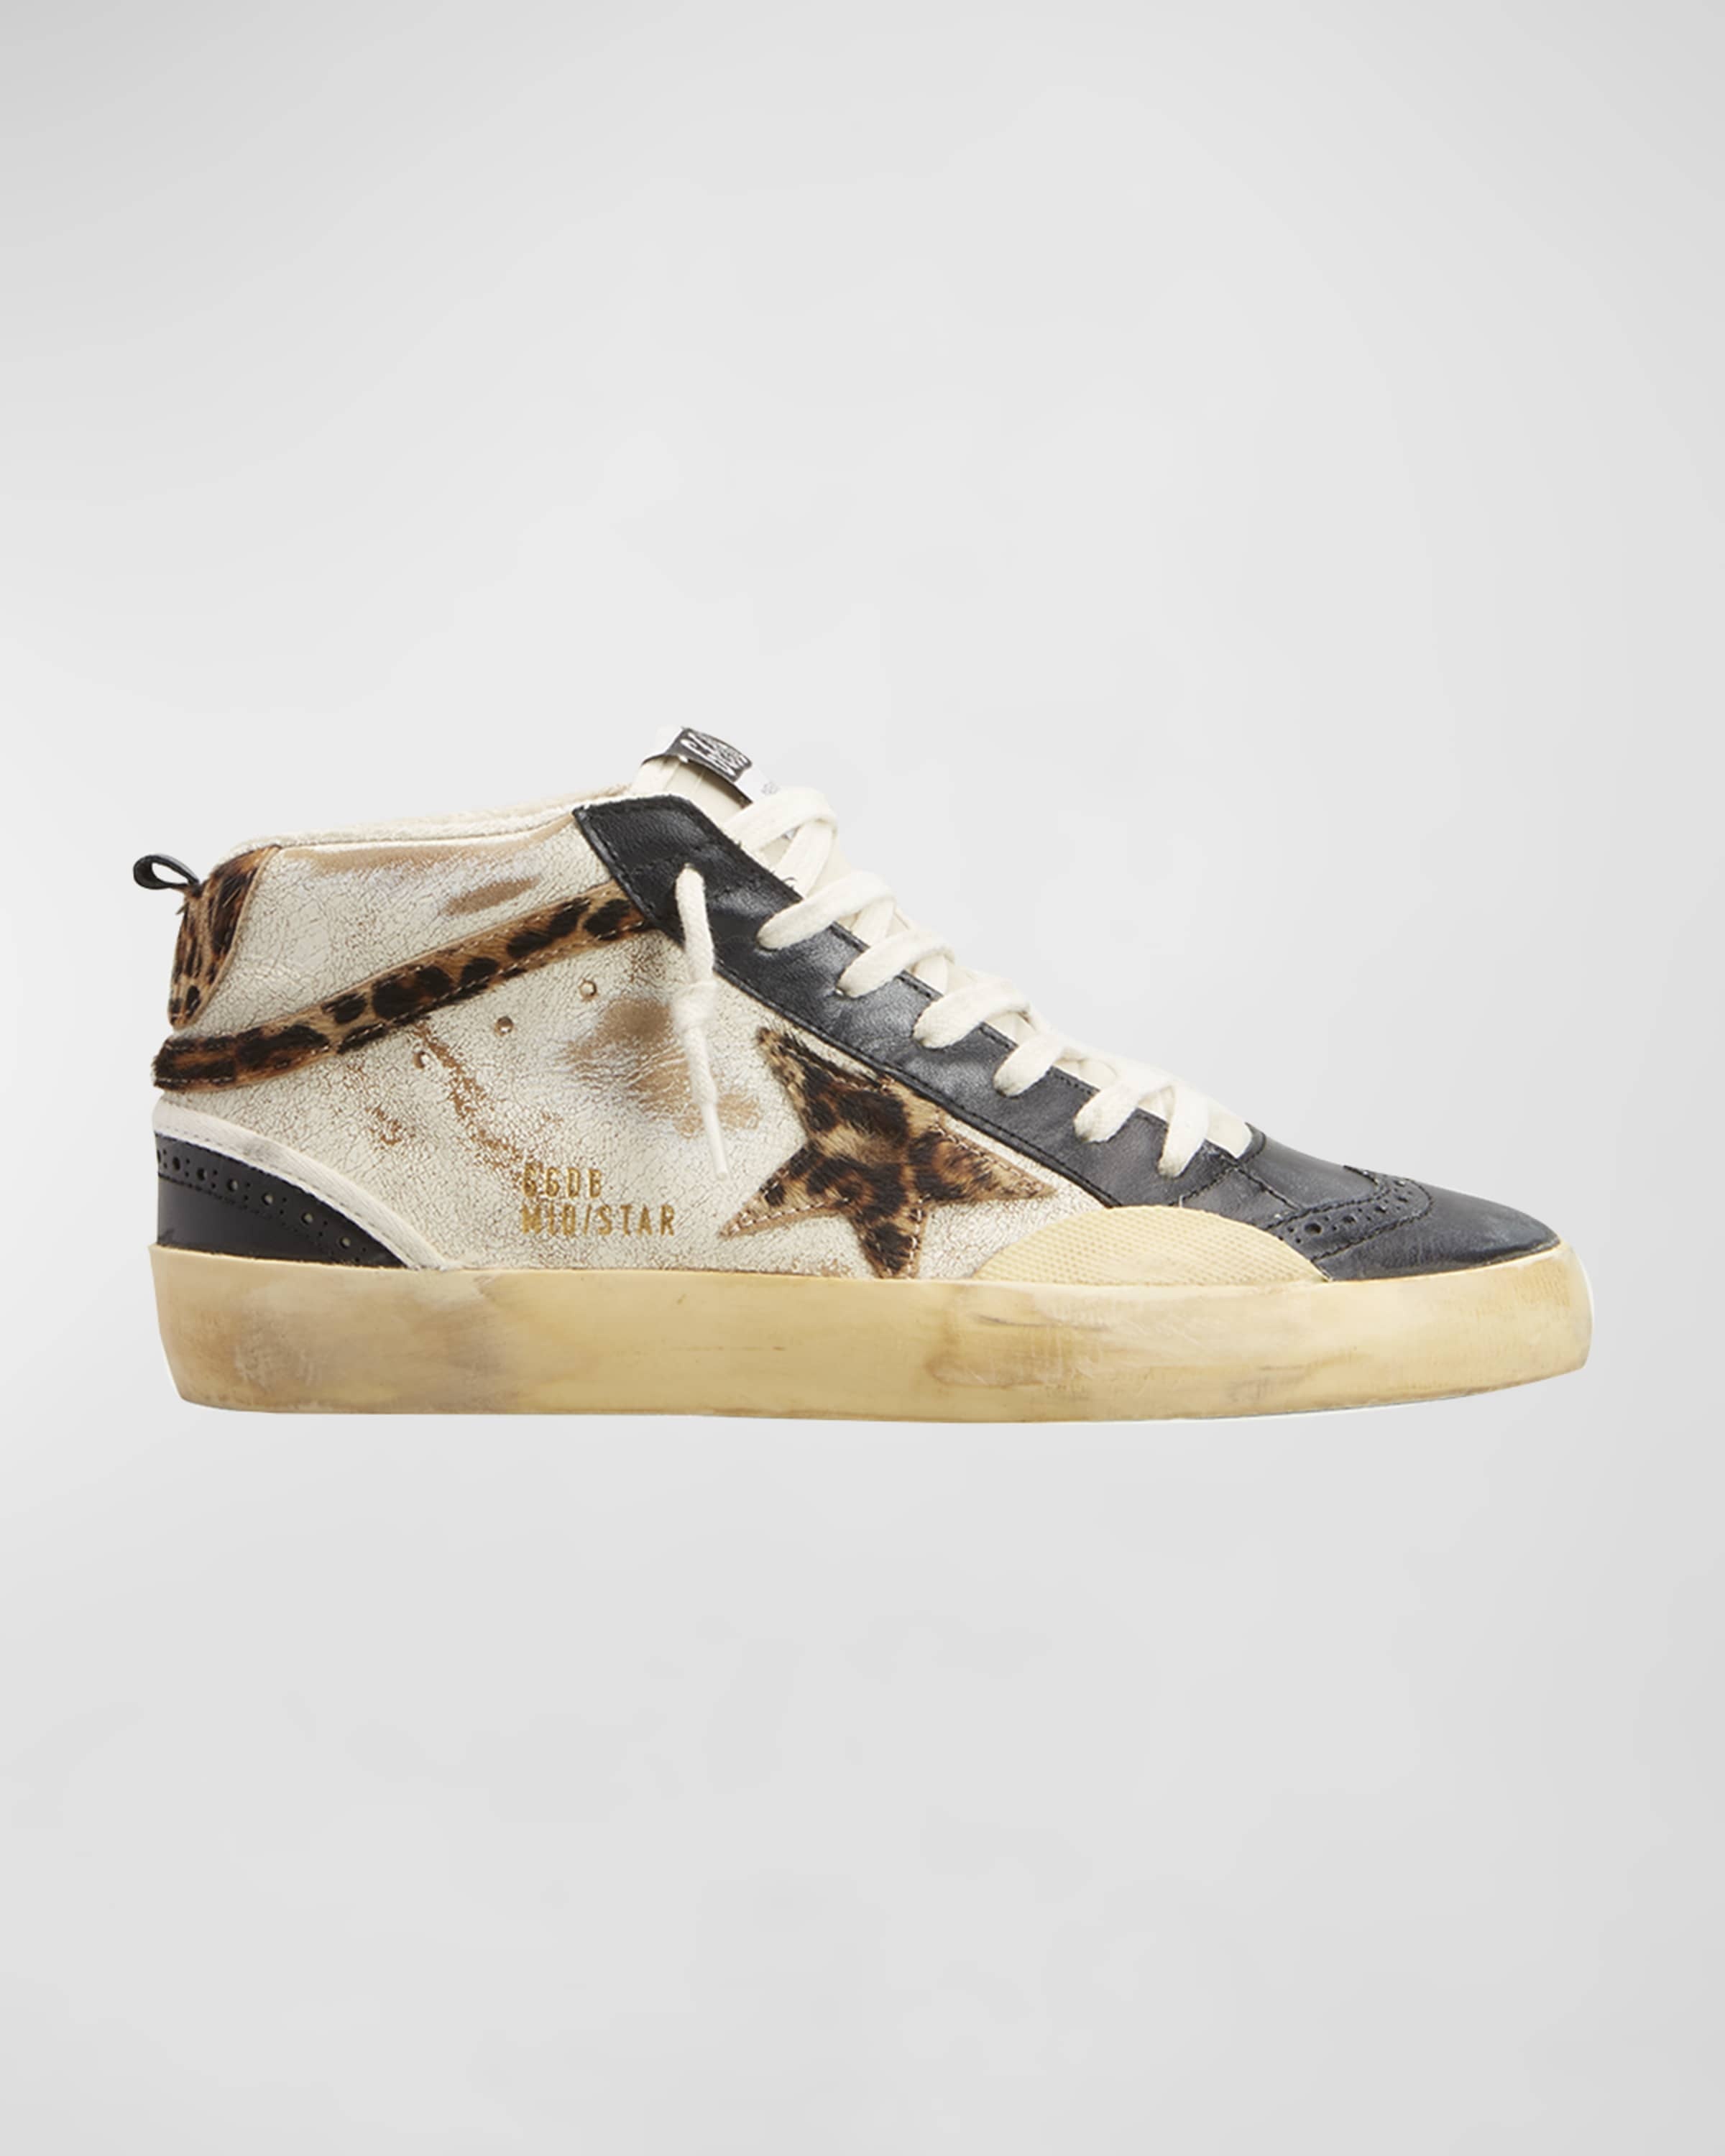 Mid Star Rustic Leather Sneakers - 1